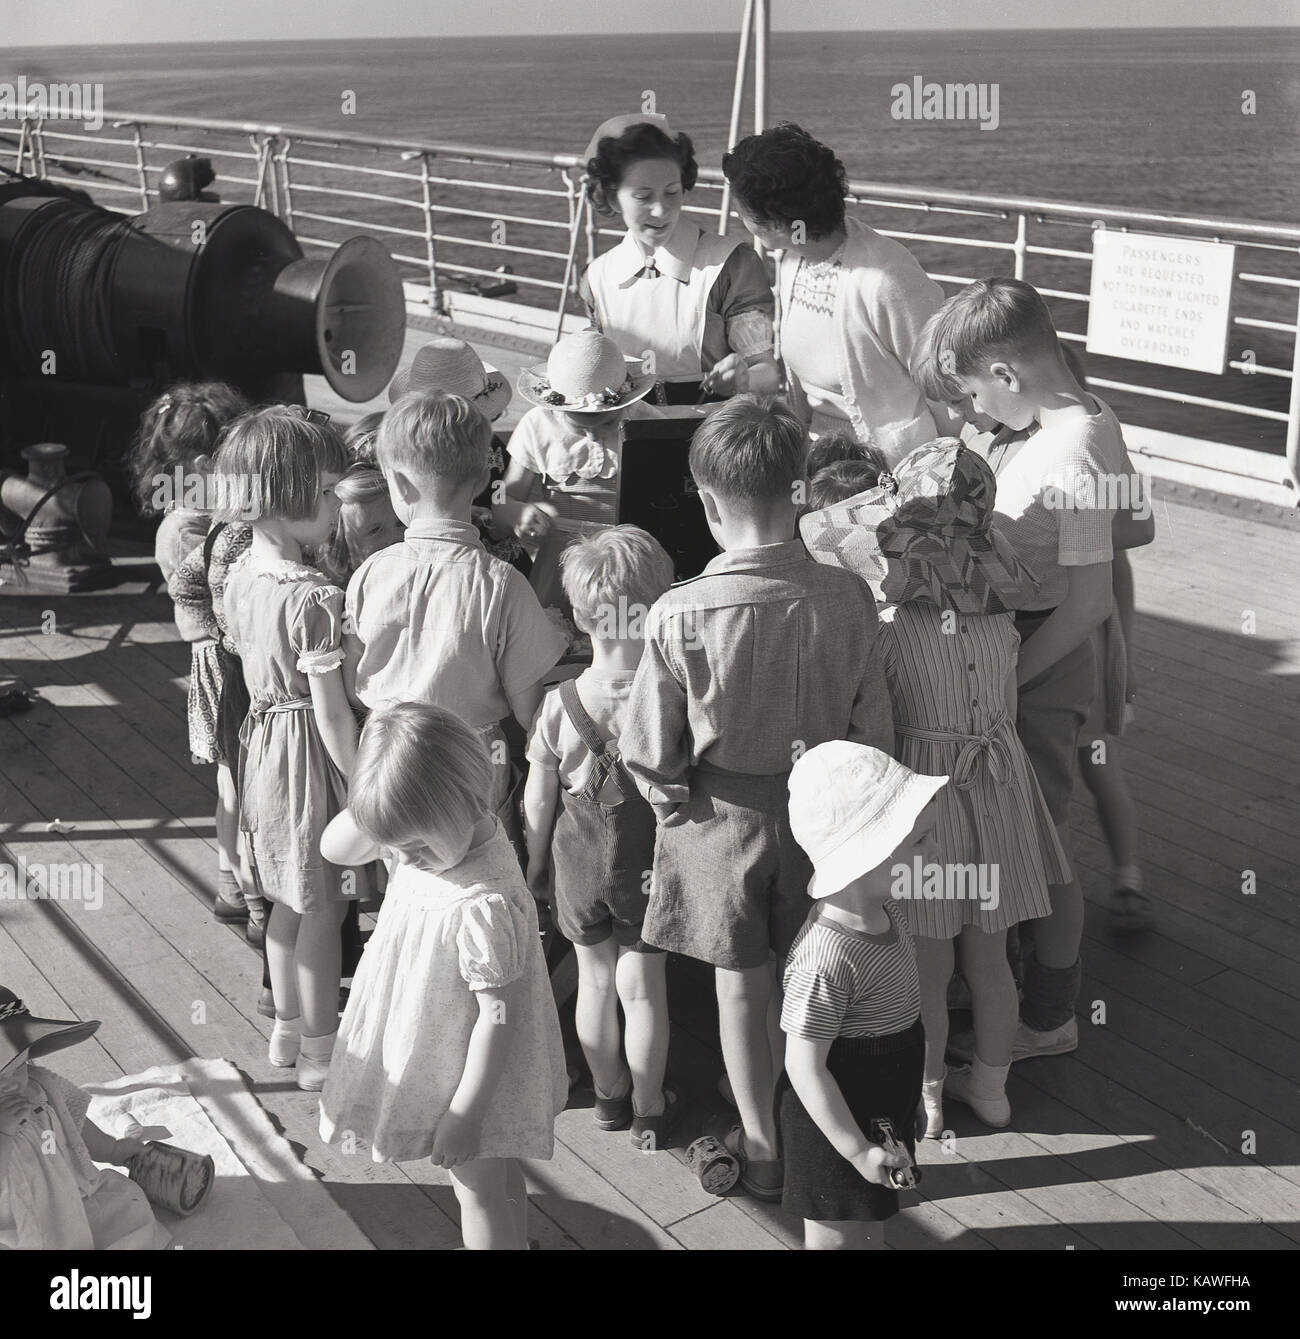 1950s, historical, young children on board a Union-Castle steamship gather on the deck around a gramophone or record player to listen to some music, supervised by a ship's nurse. Stock Photo